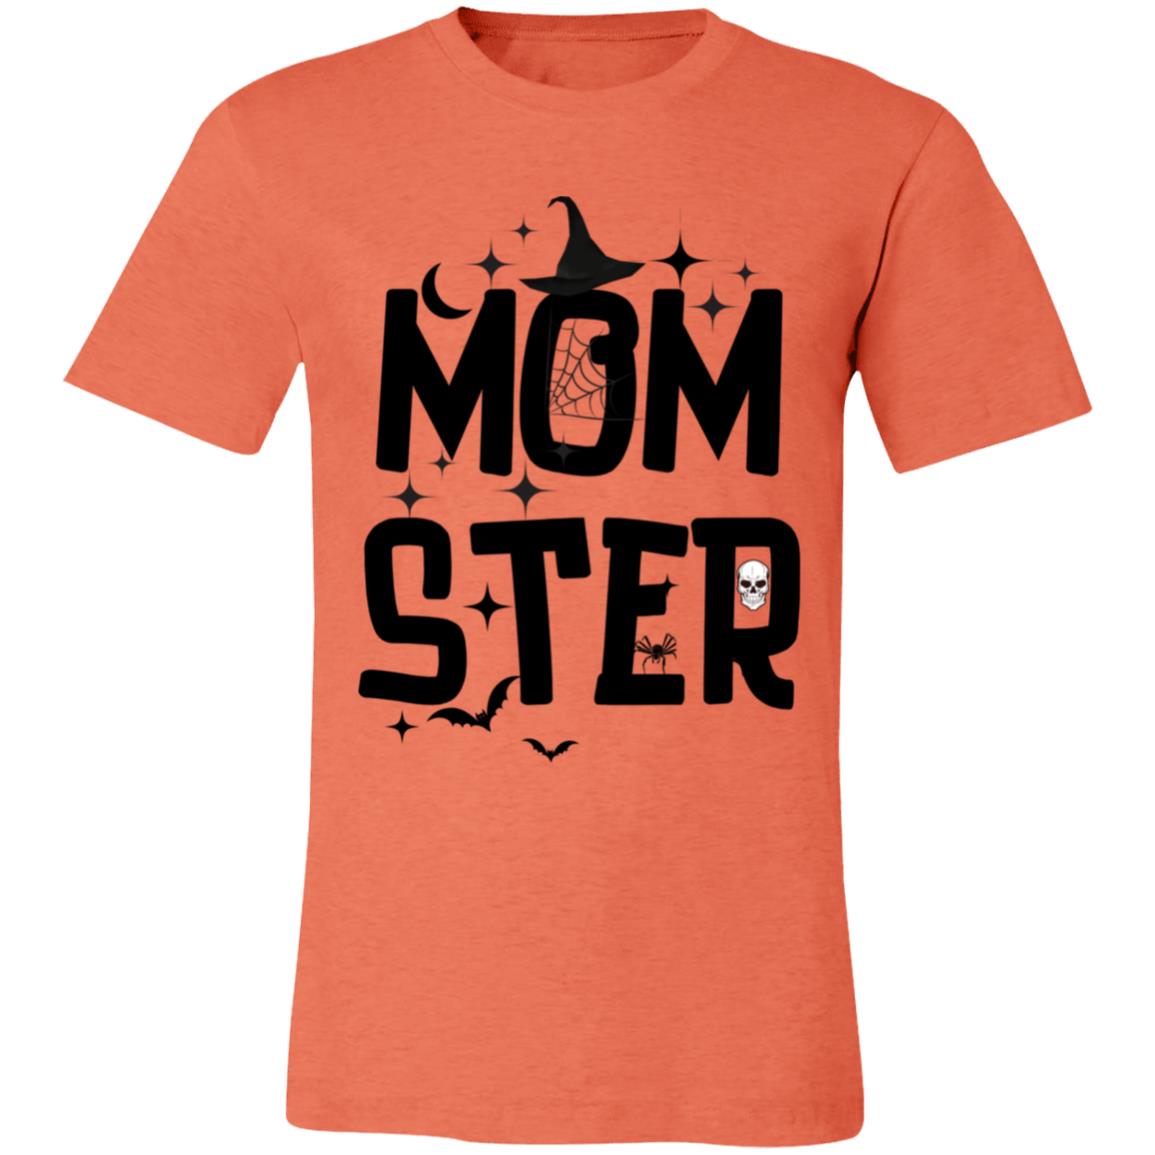 Get trendy with MOMster - T-Shirts available at Good Gift Company. Grab yours for $22.95 today!